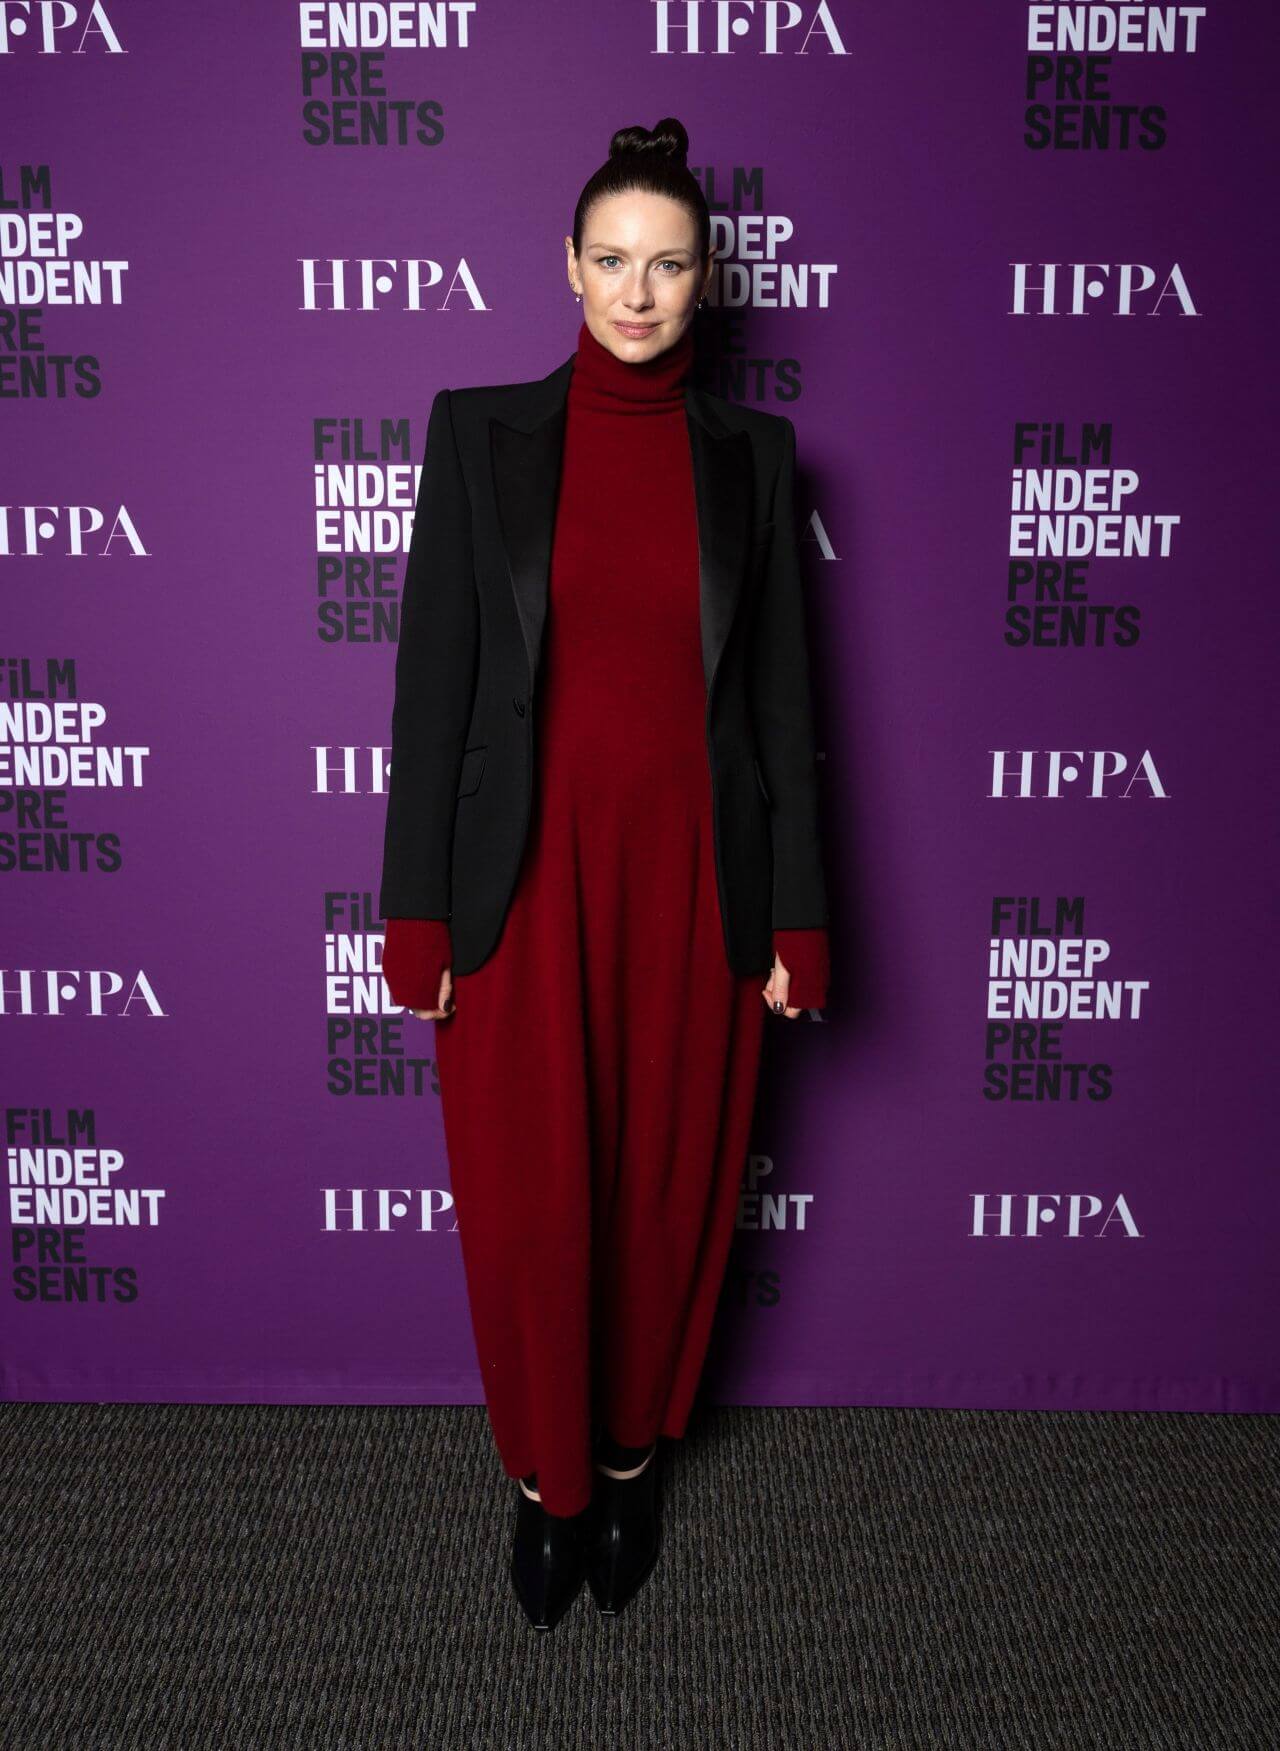 Caitriona Balfe In Maroon High Neck Long Dress with Black Blazer At Film Independent Screening of “Belfast” in LA